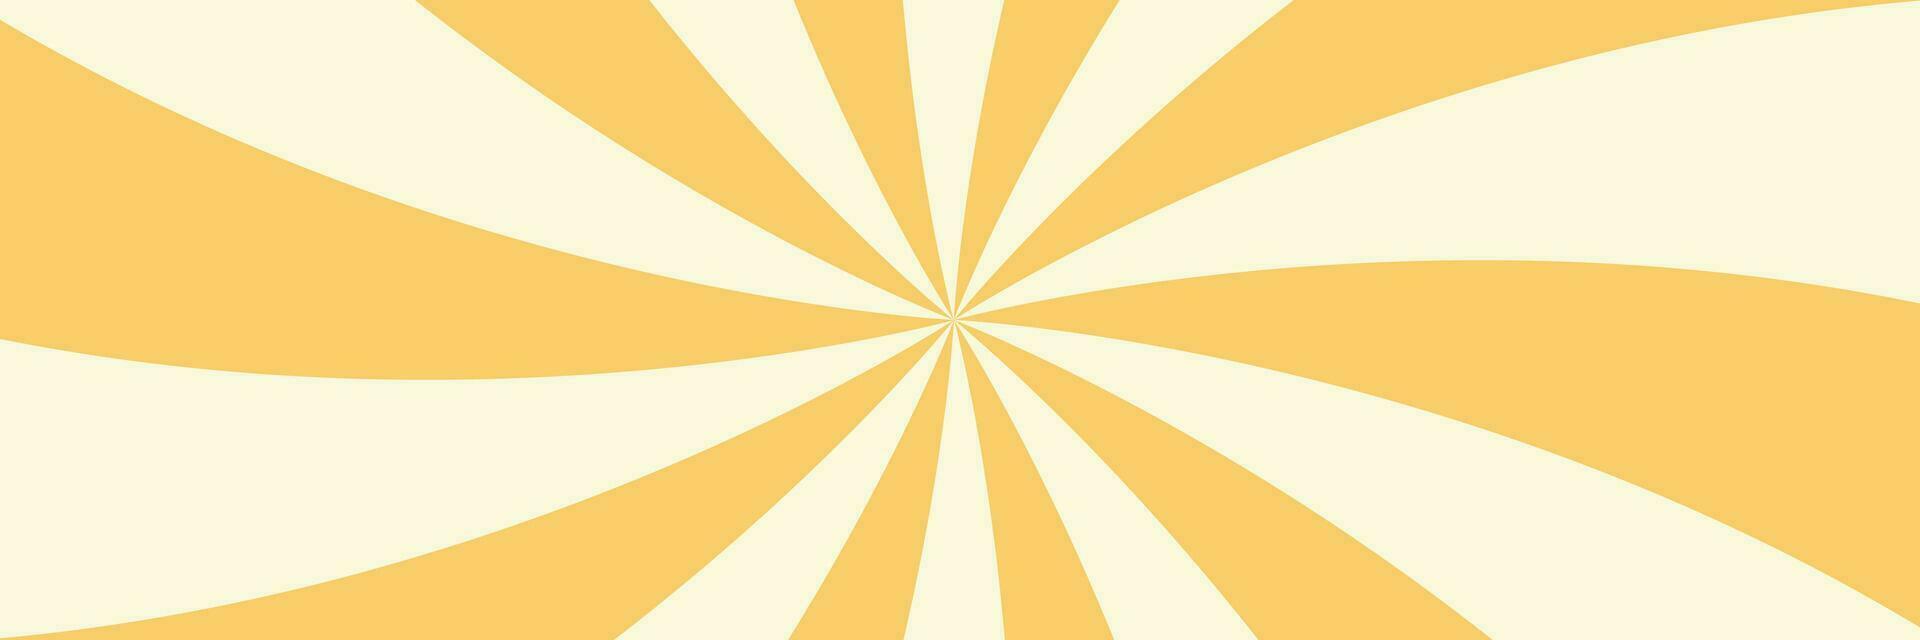 Swirling radial ice cream background. Vector illustration for swirl design. Summer. Vortex spiral twirl. Yellow. Helix rotation rays. Converging psychadelic scalable stripes. Fun sun light beams.